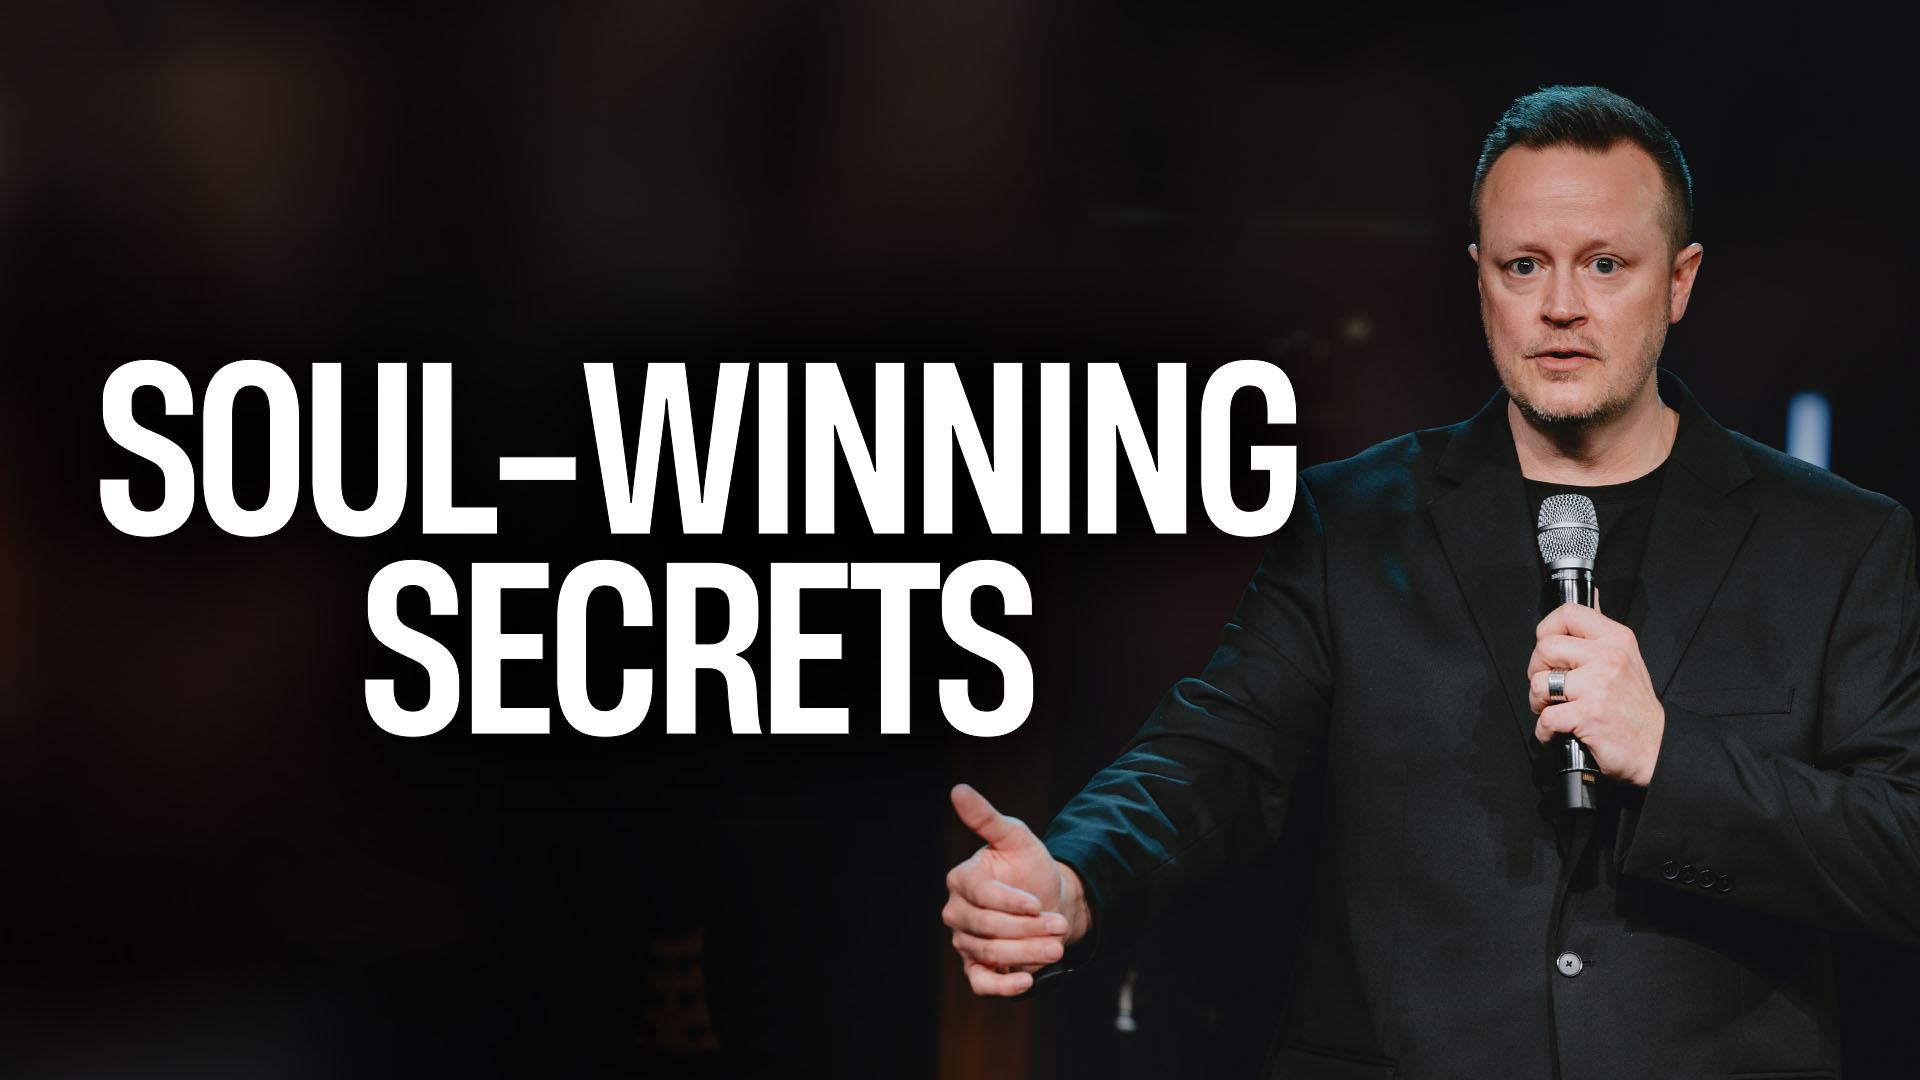 Featured Image for “Soul-Winning Secrets”